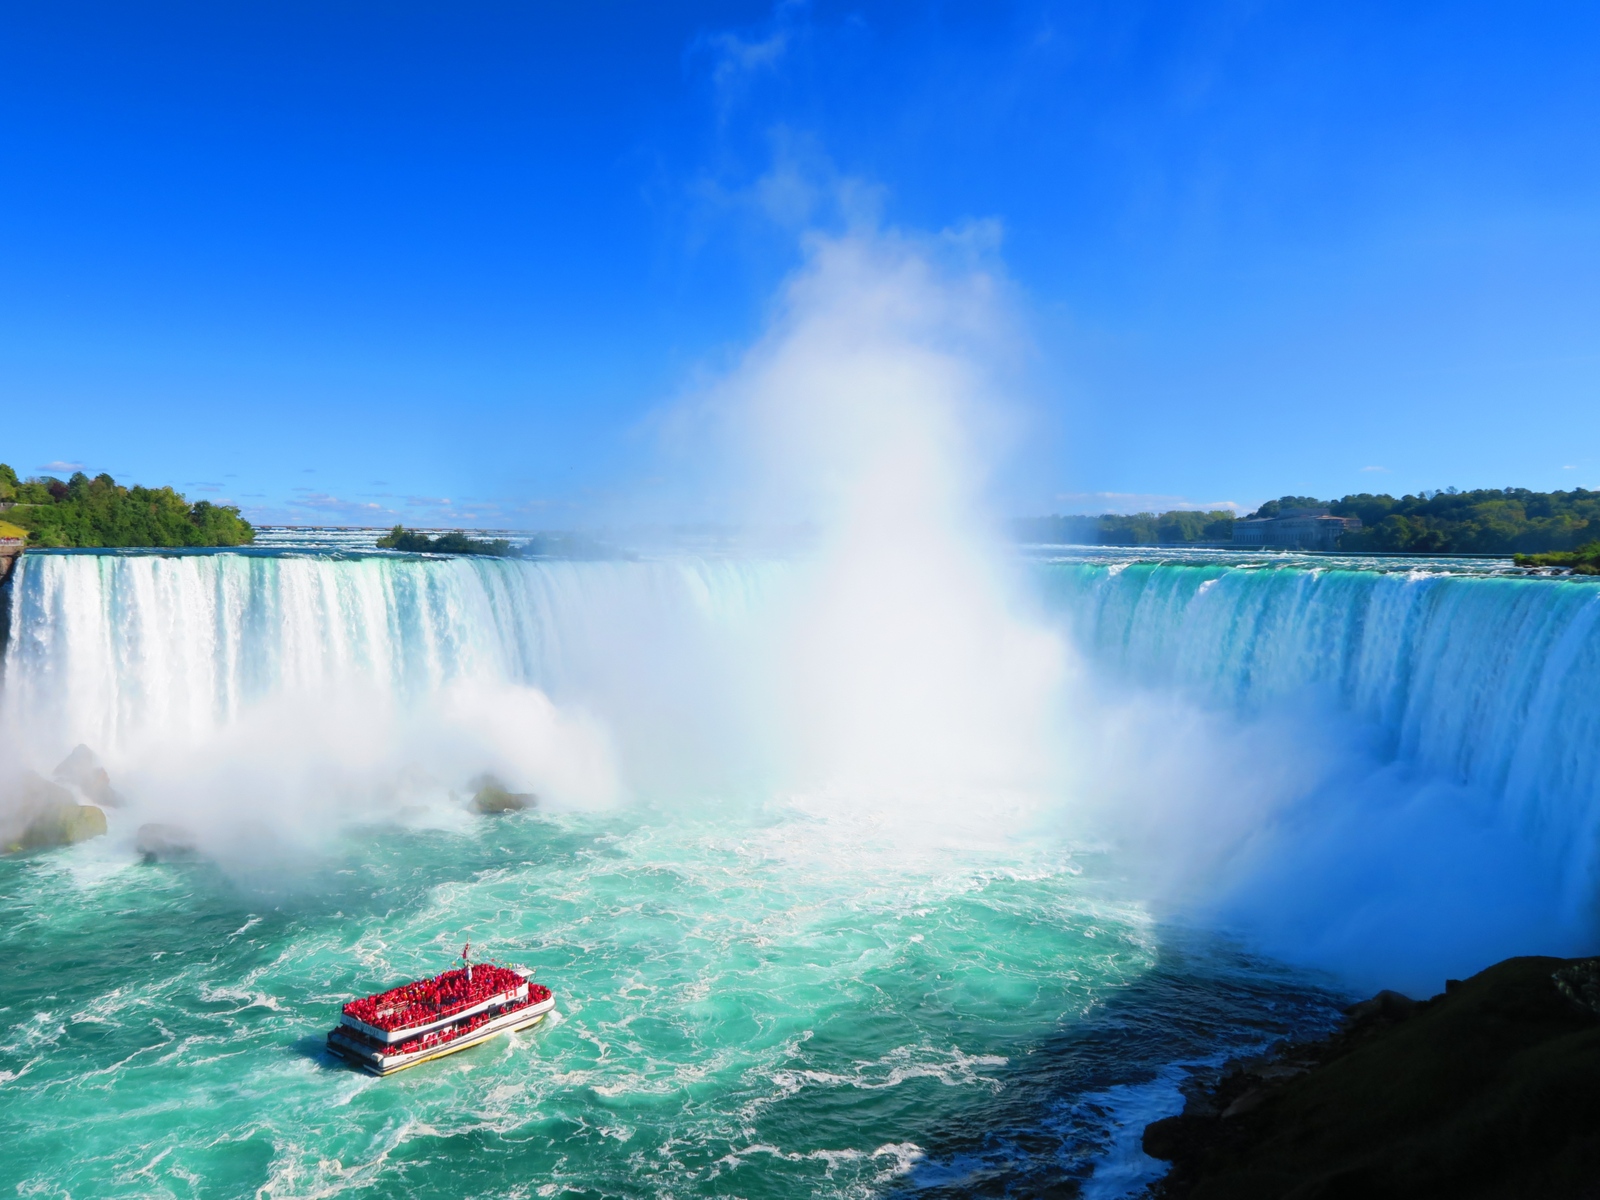 A red touring boat nearing the majestic Niagara Falls, considered as one of the most iconic places in America